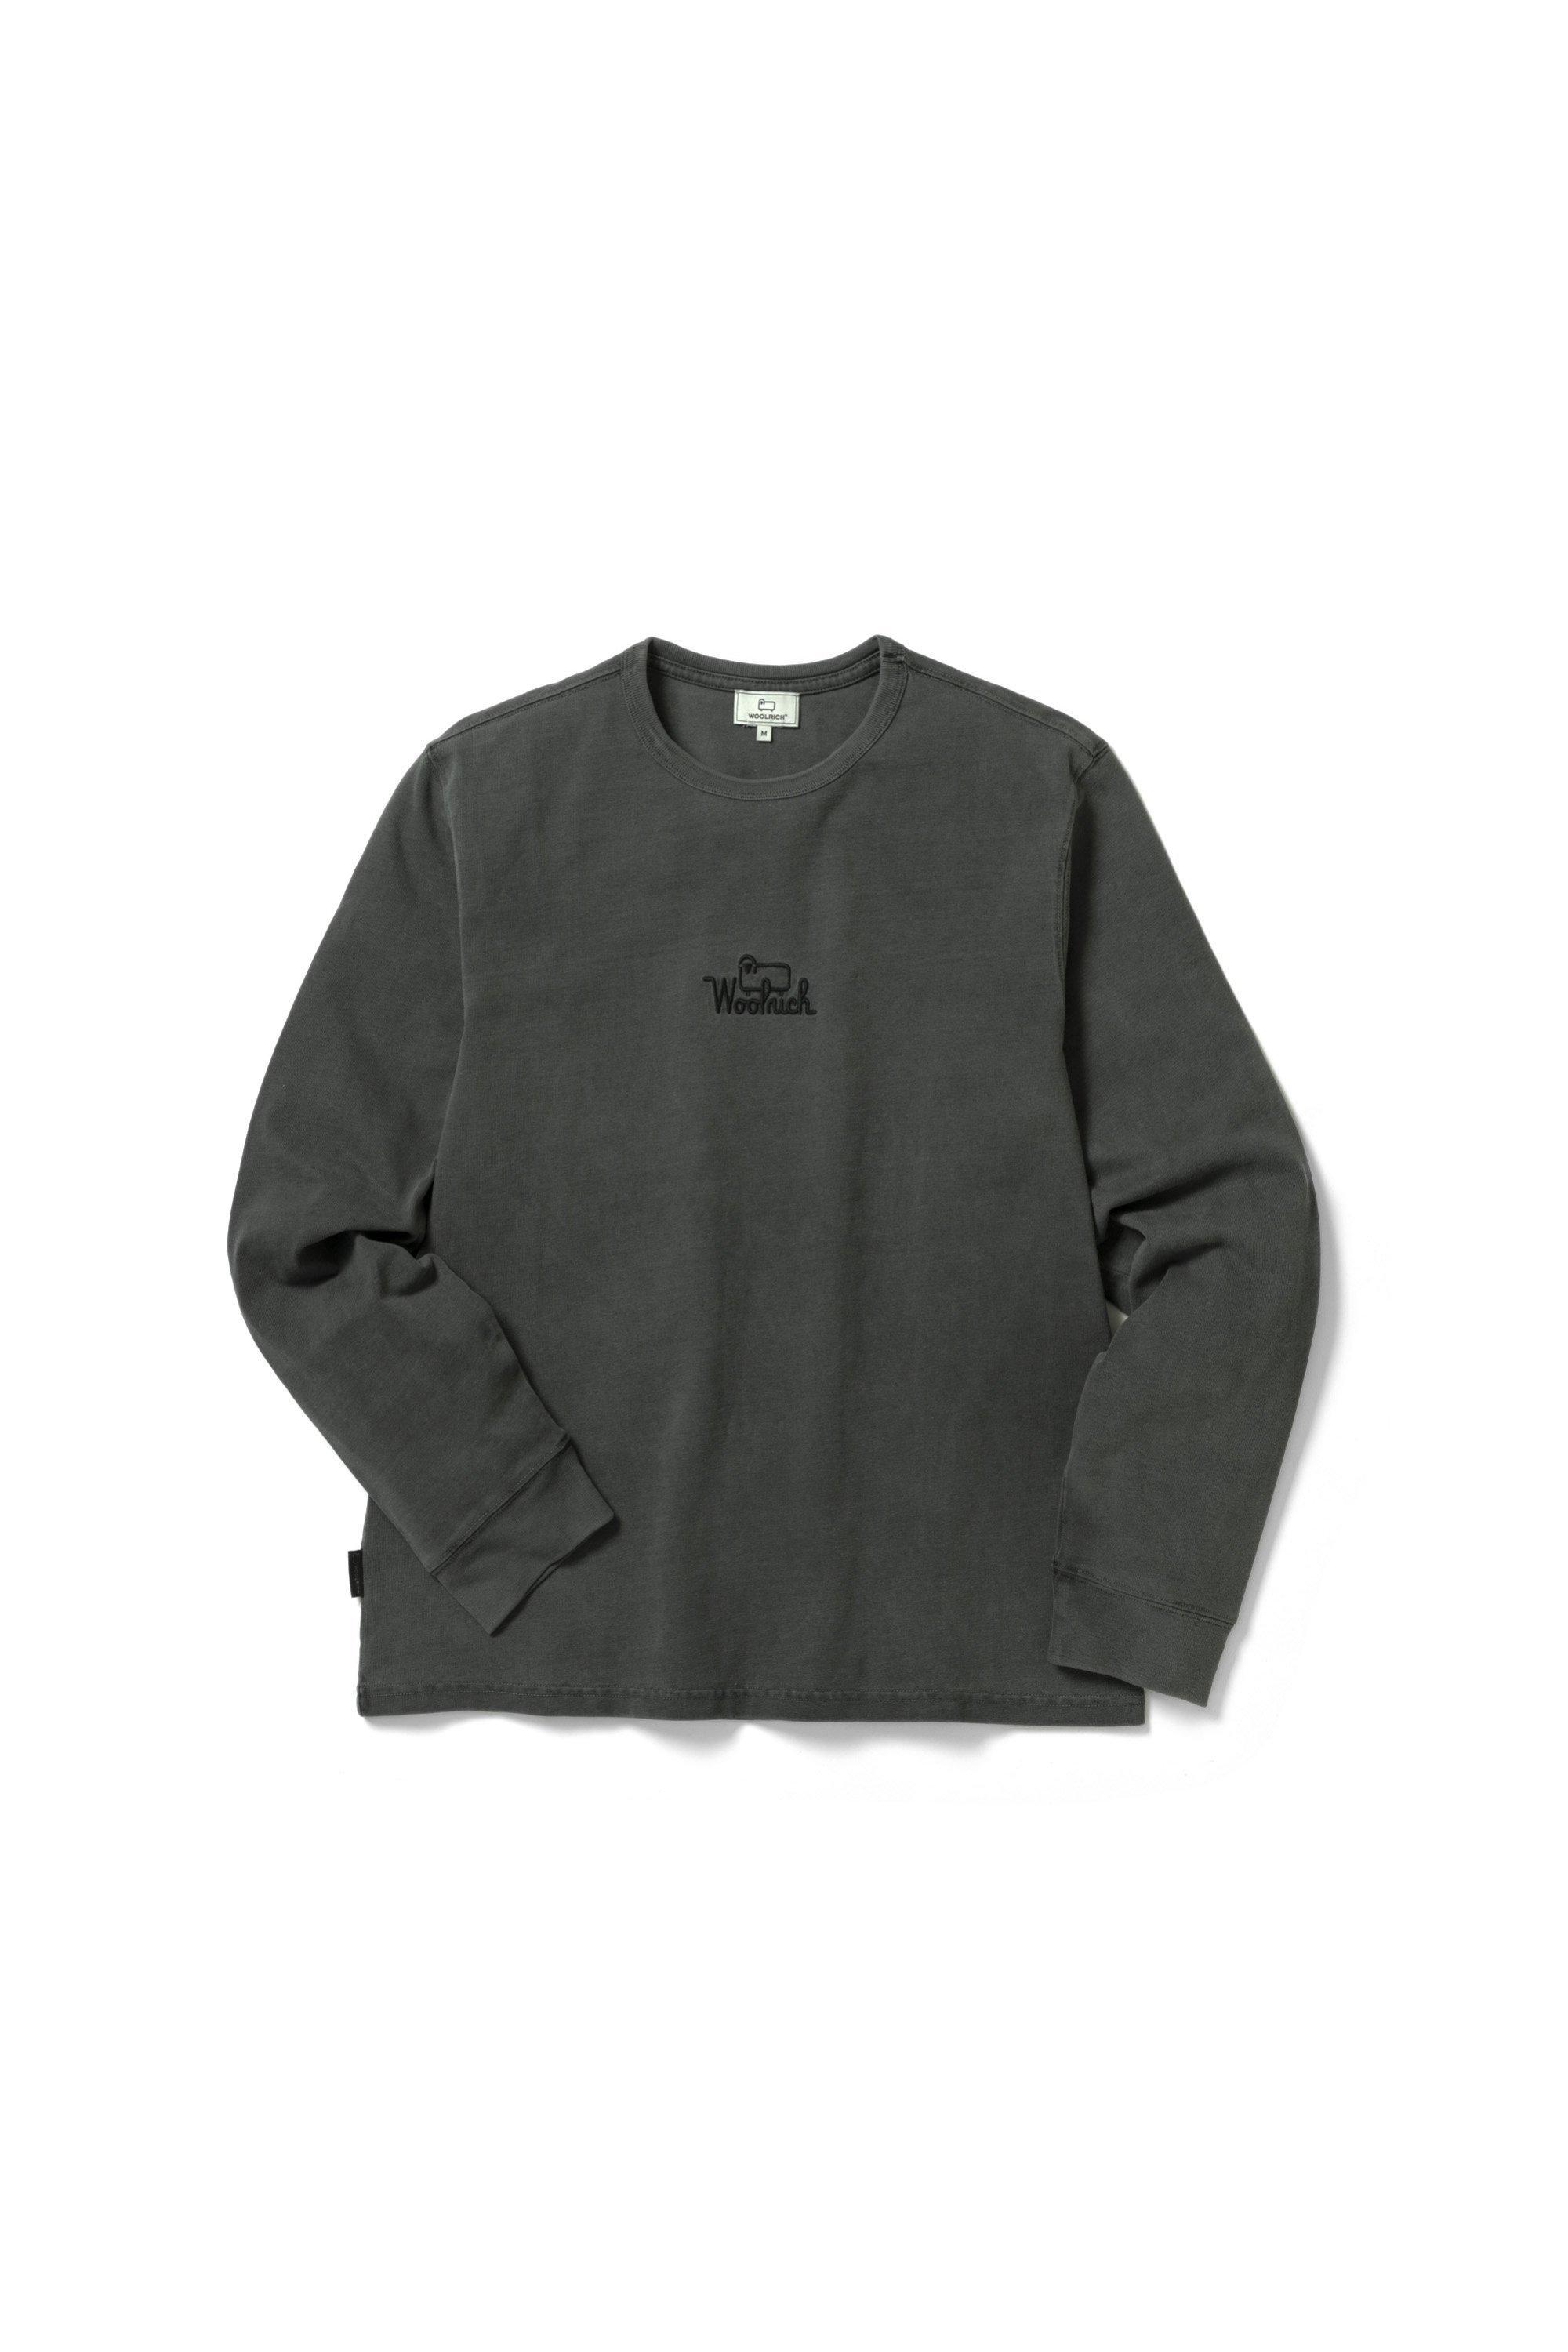 【SALE／30%OFF】WOOLRICH (M)FADED LONG SLEEVES TEE ウールリッチ カットソー Tシャツ レッド ブラック【送料無料】